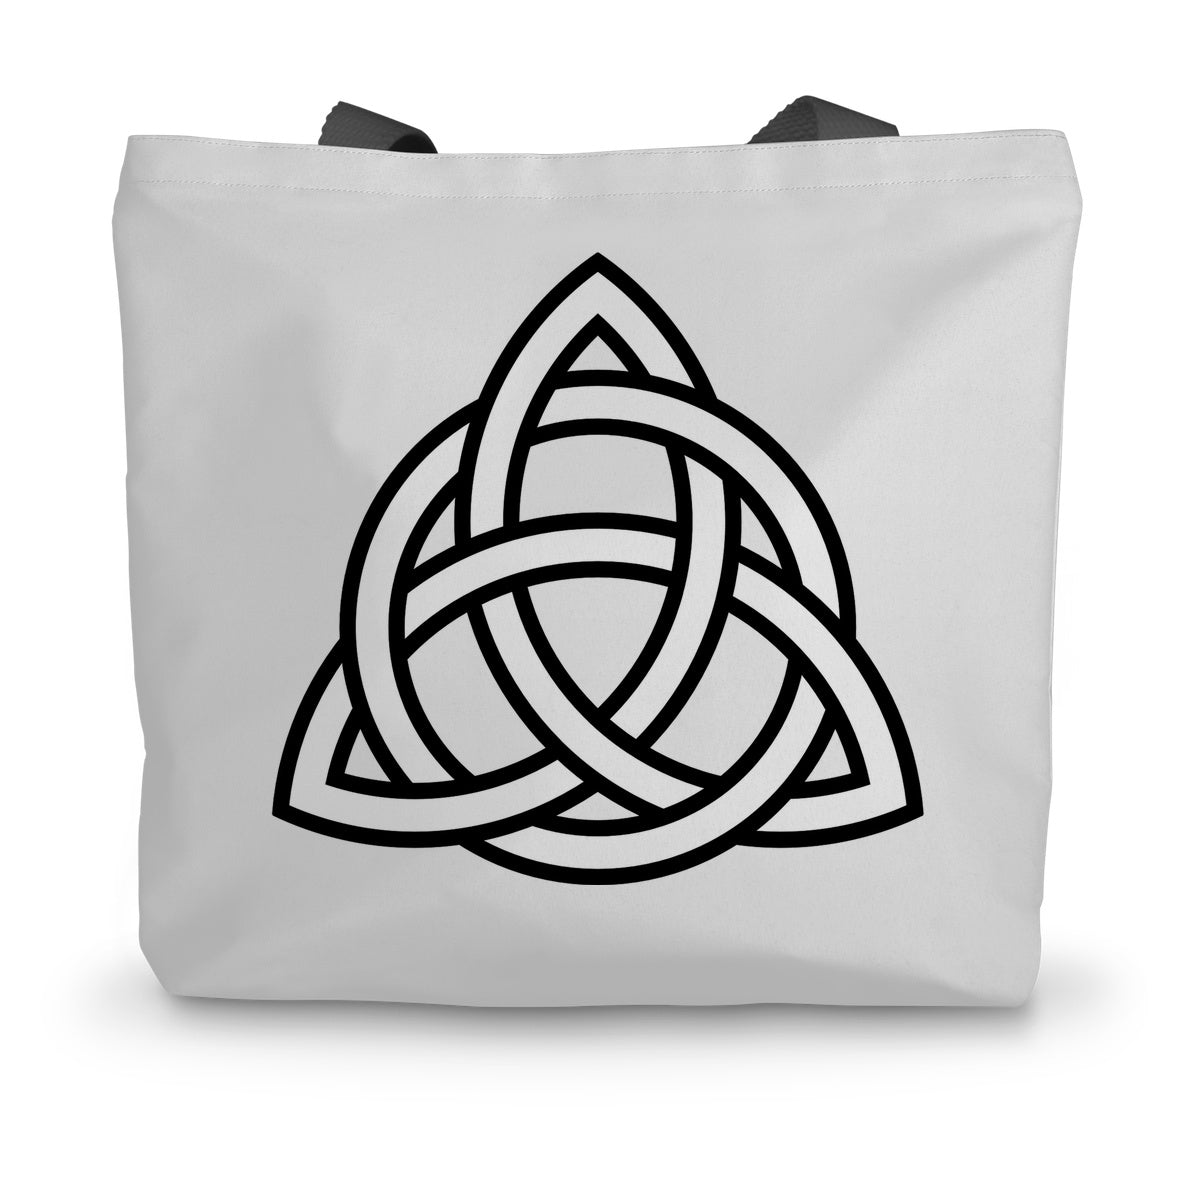 Triangular Celtic Knot Canvas Tote Bag